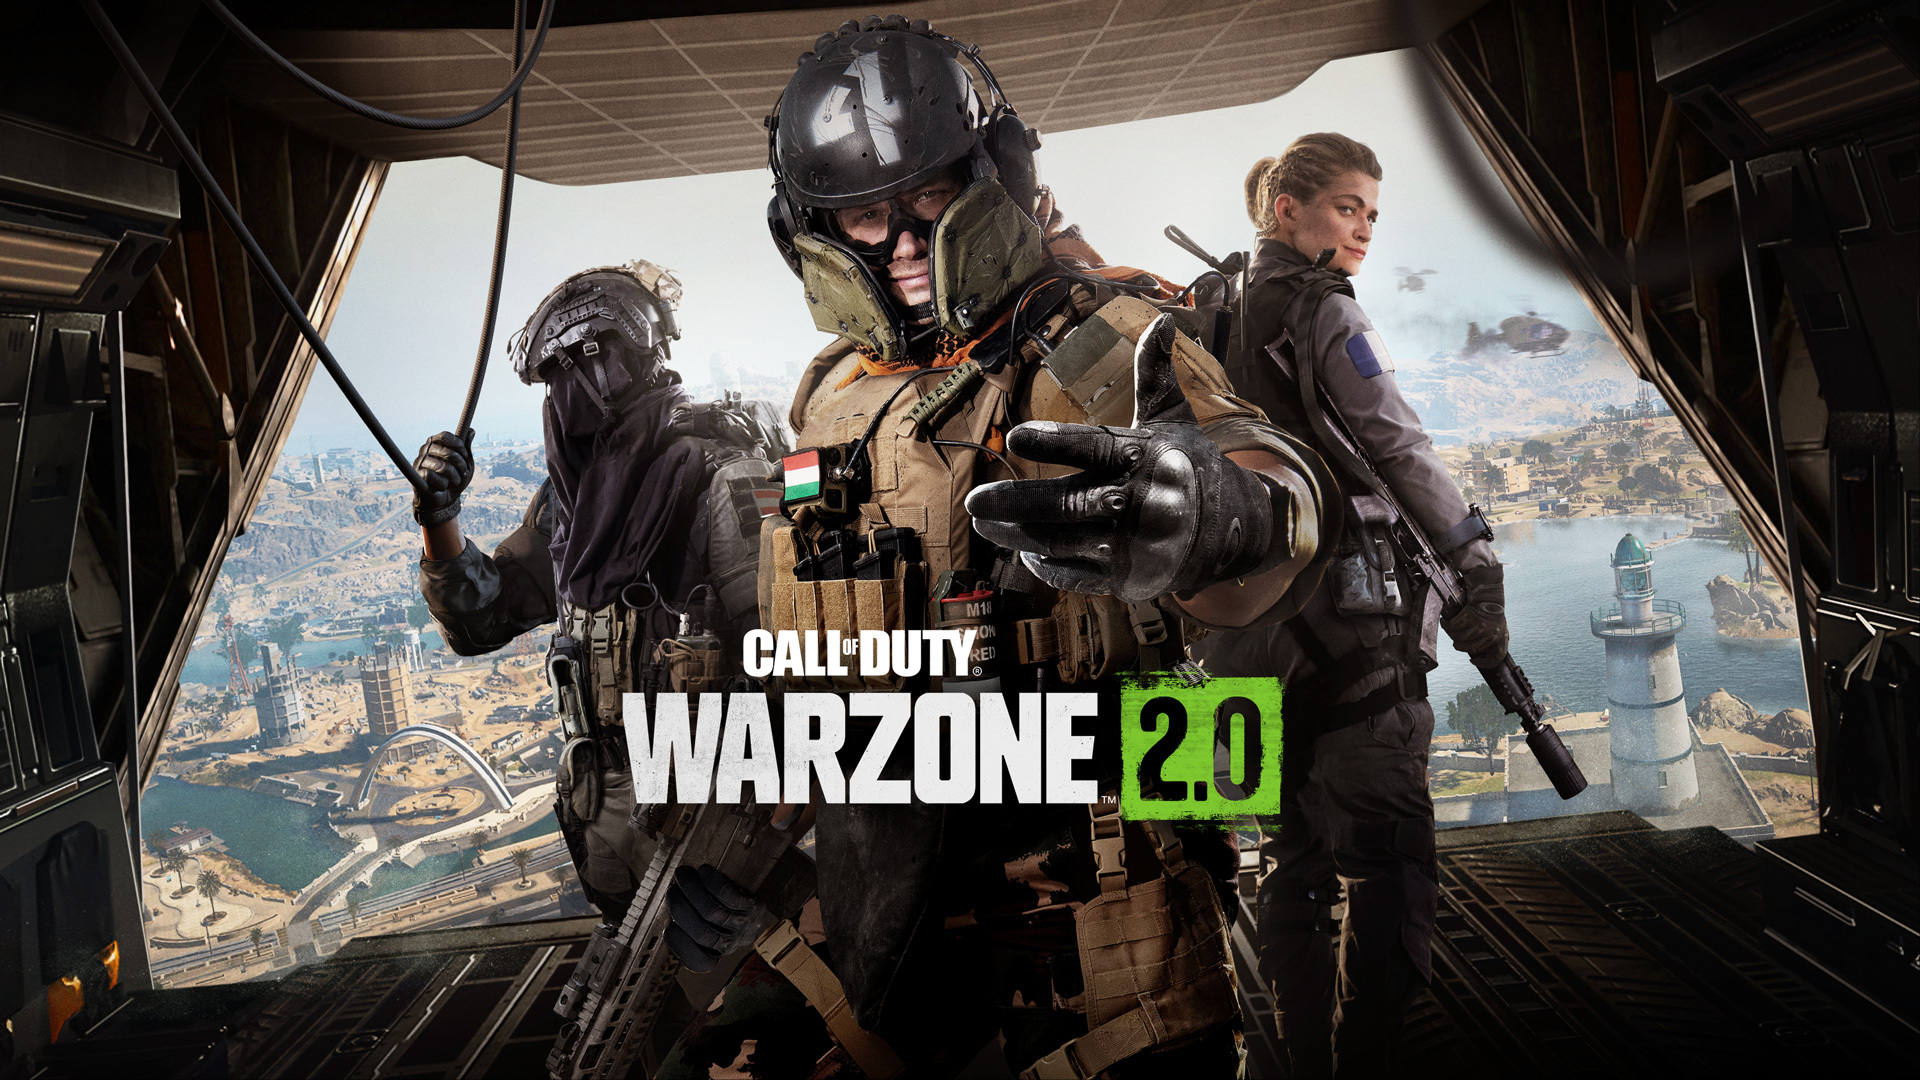 Intel® Arc™ Graphics - Driver Release for Call of Duty®: Warzone™ 2.0*,  Dysterra* and Sonic Frontiers*